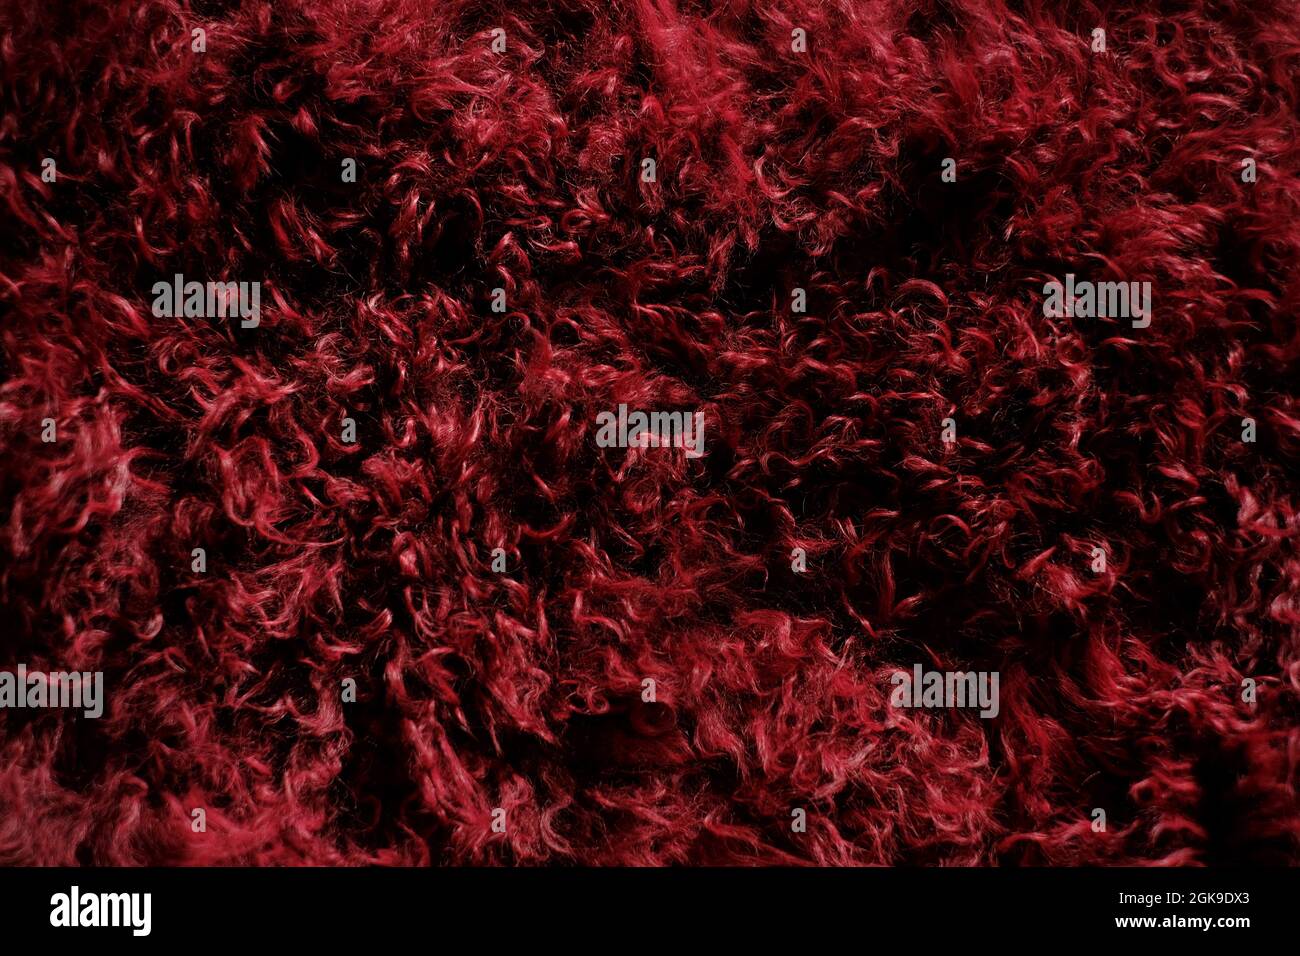 Fur background. Fluffy burgundy fur texture.Red real wool. Fur texture. Goat fur surface. Warm fur texture. Stock Photo